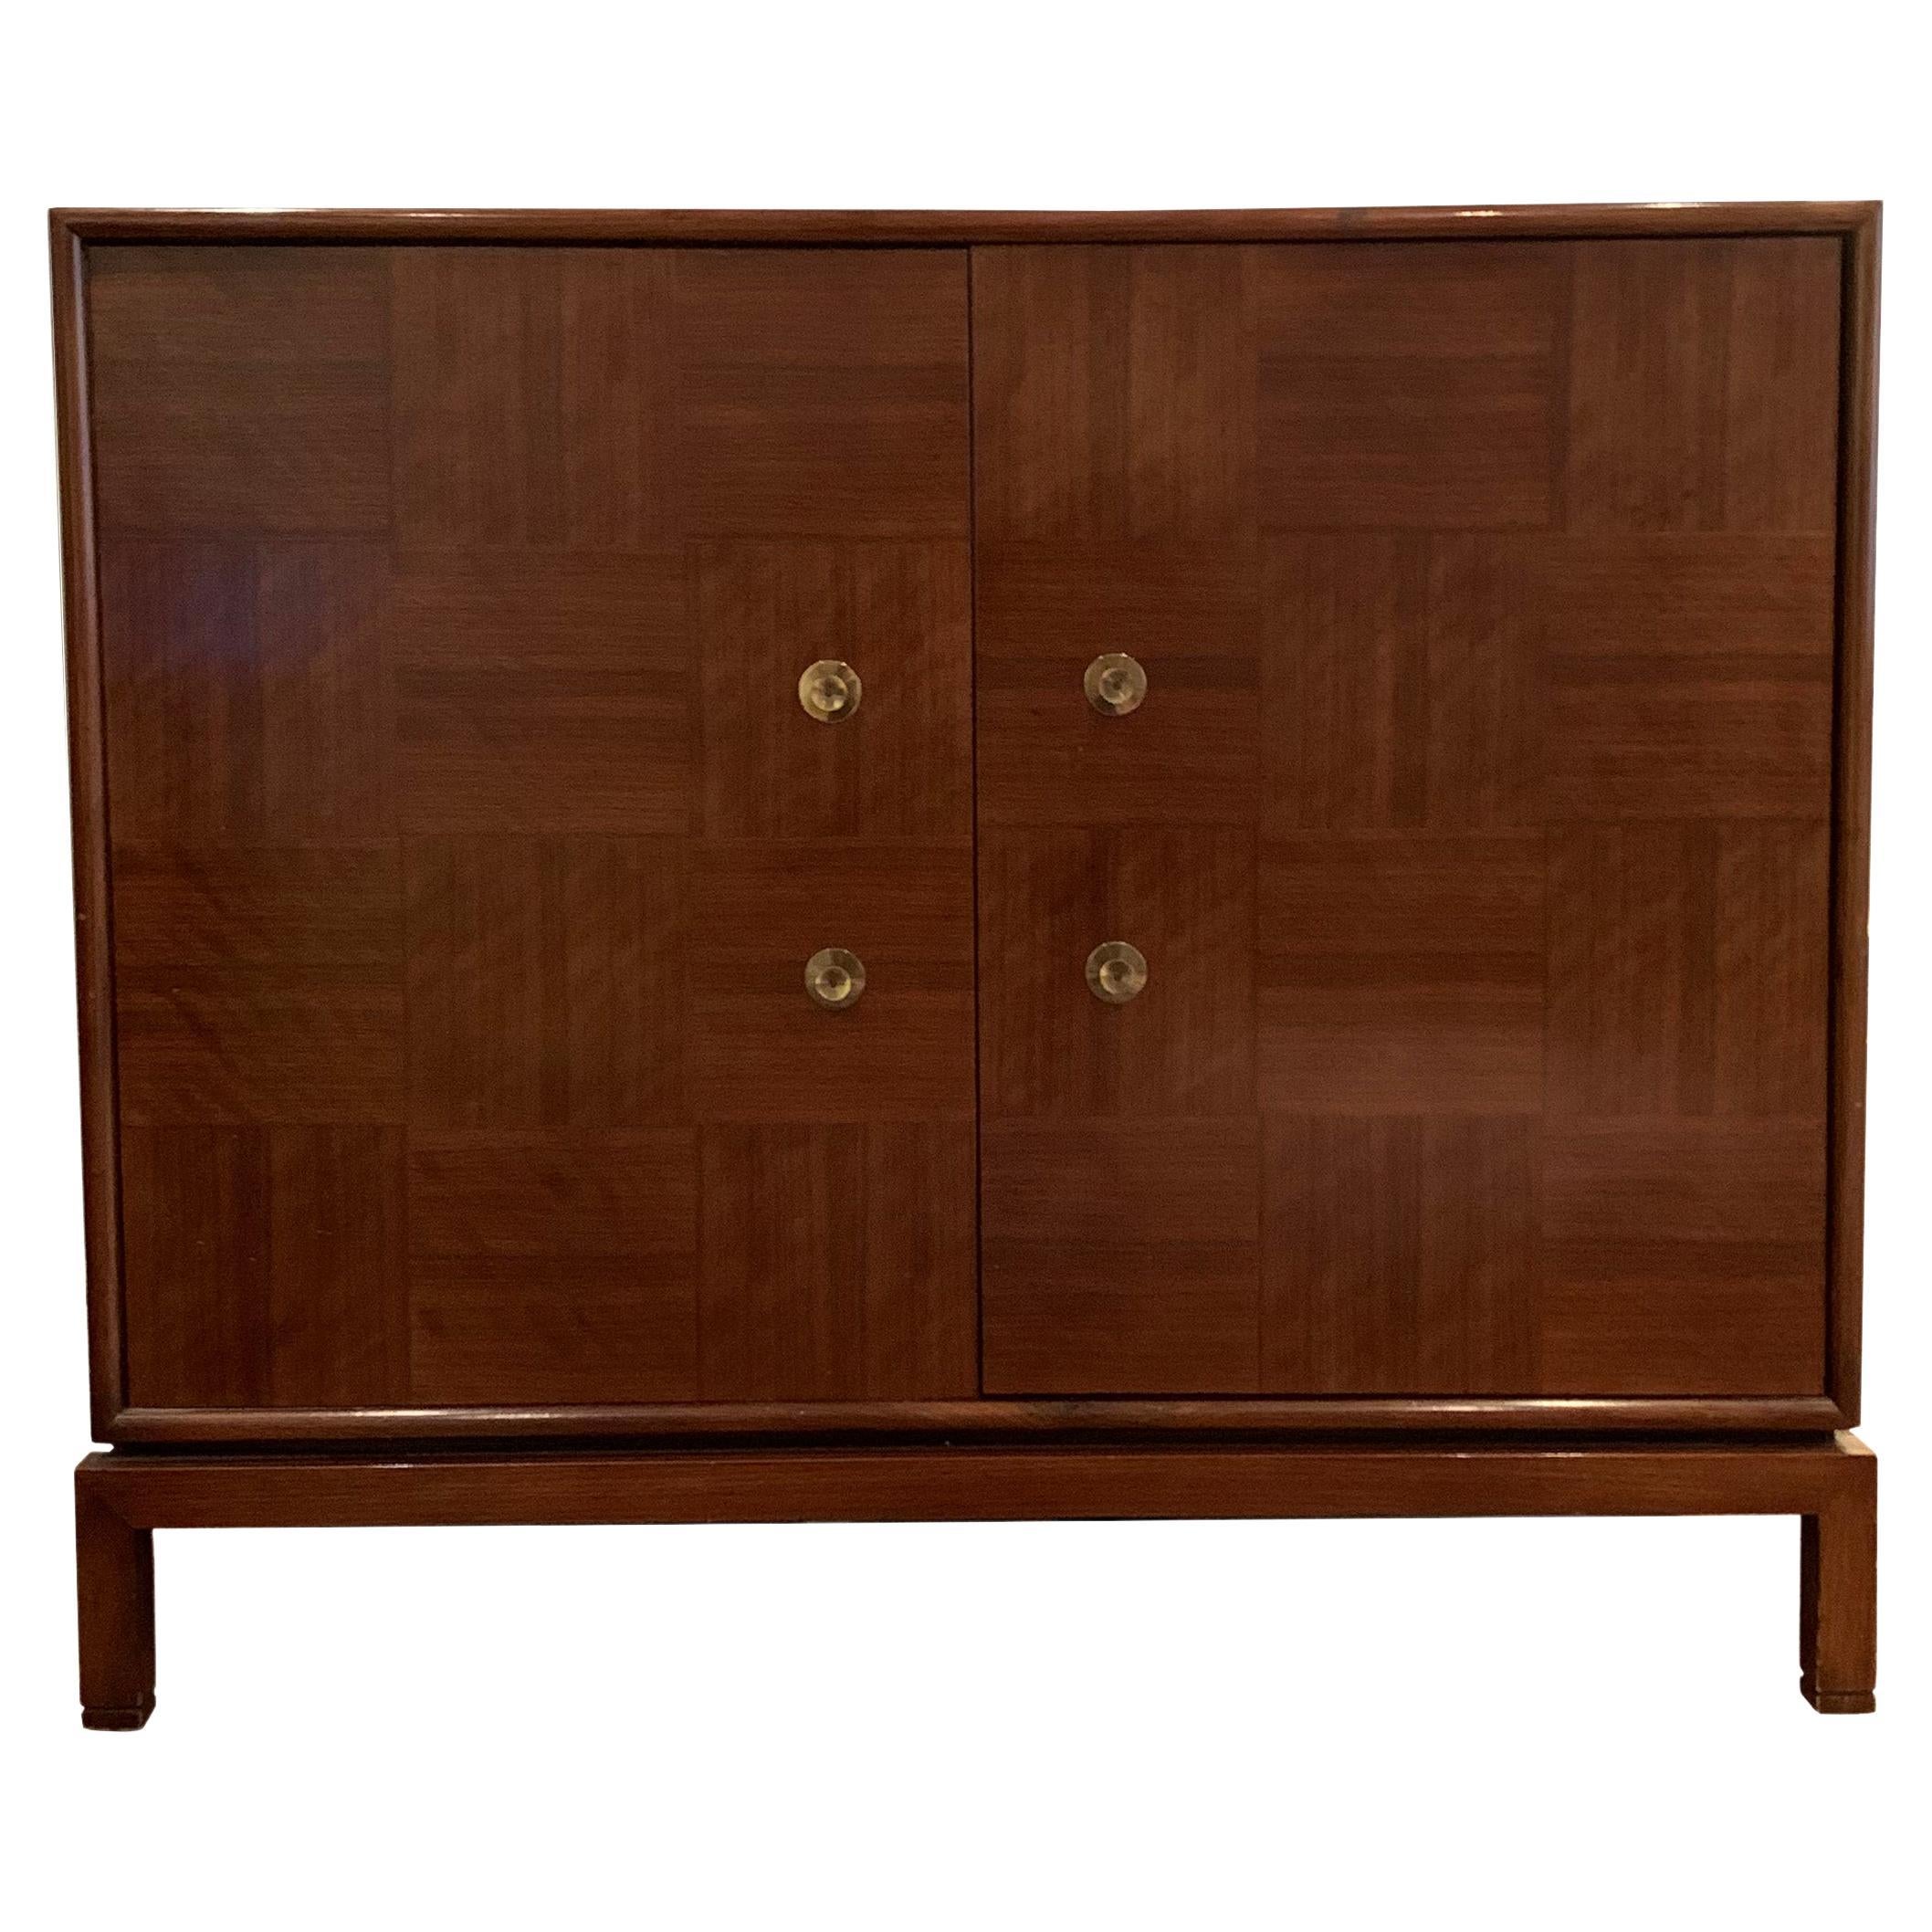 Mission Style Walnut Parquetry Two Door Cabinet by Baker Furniture 